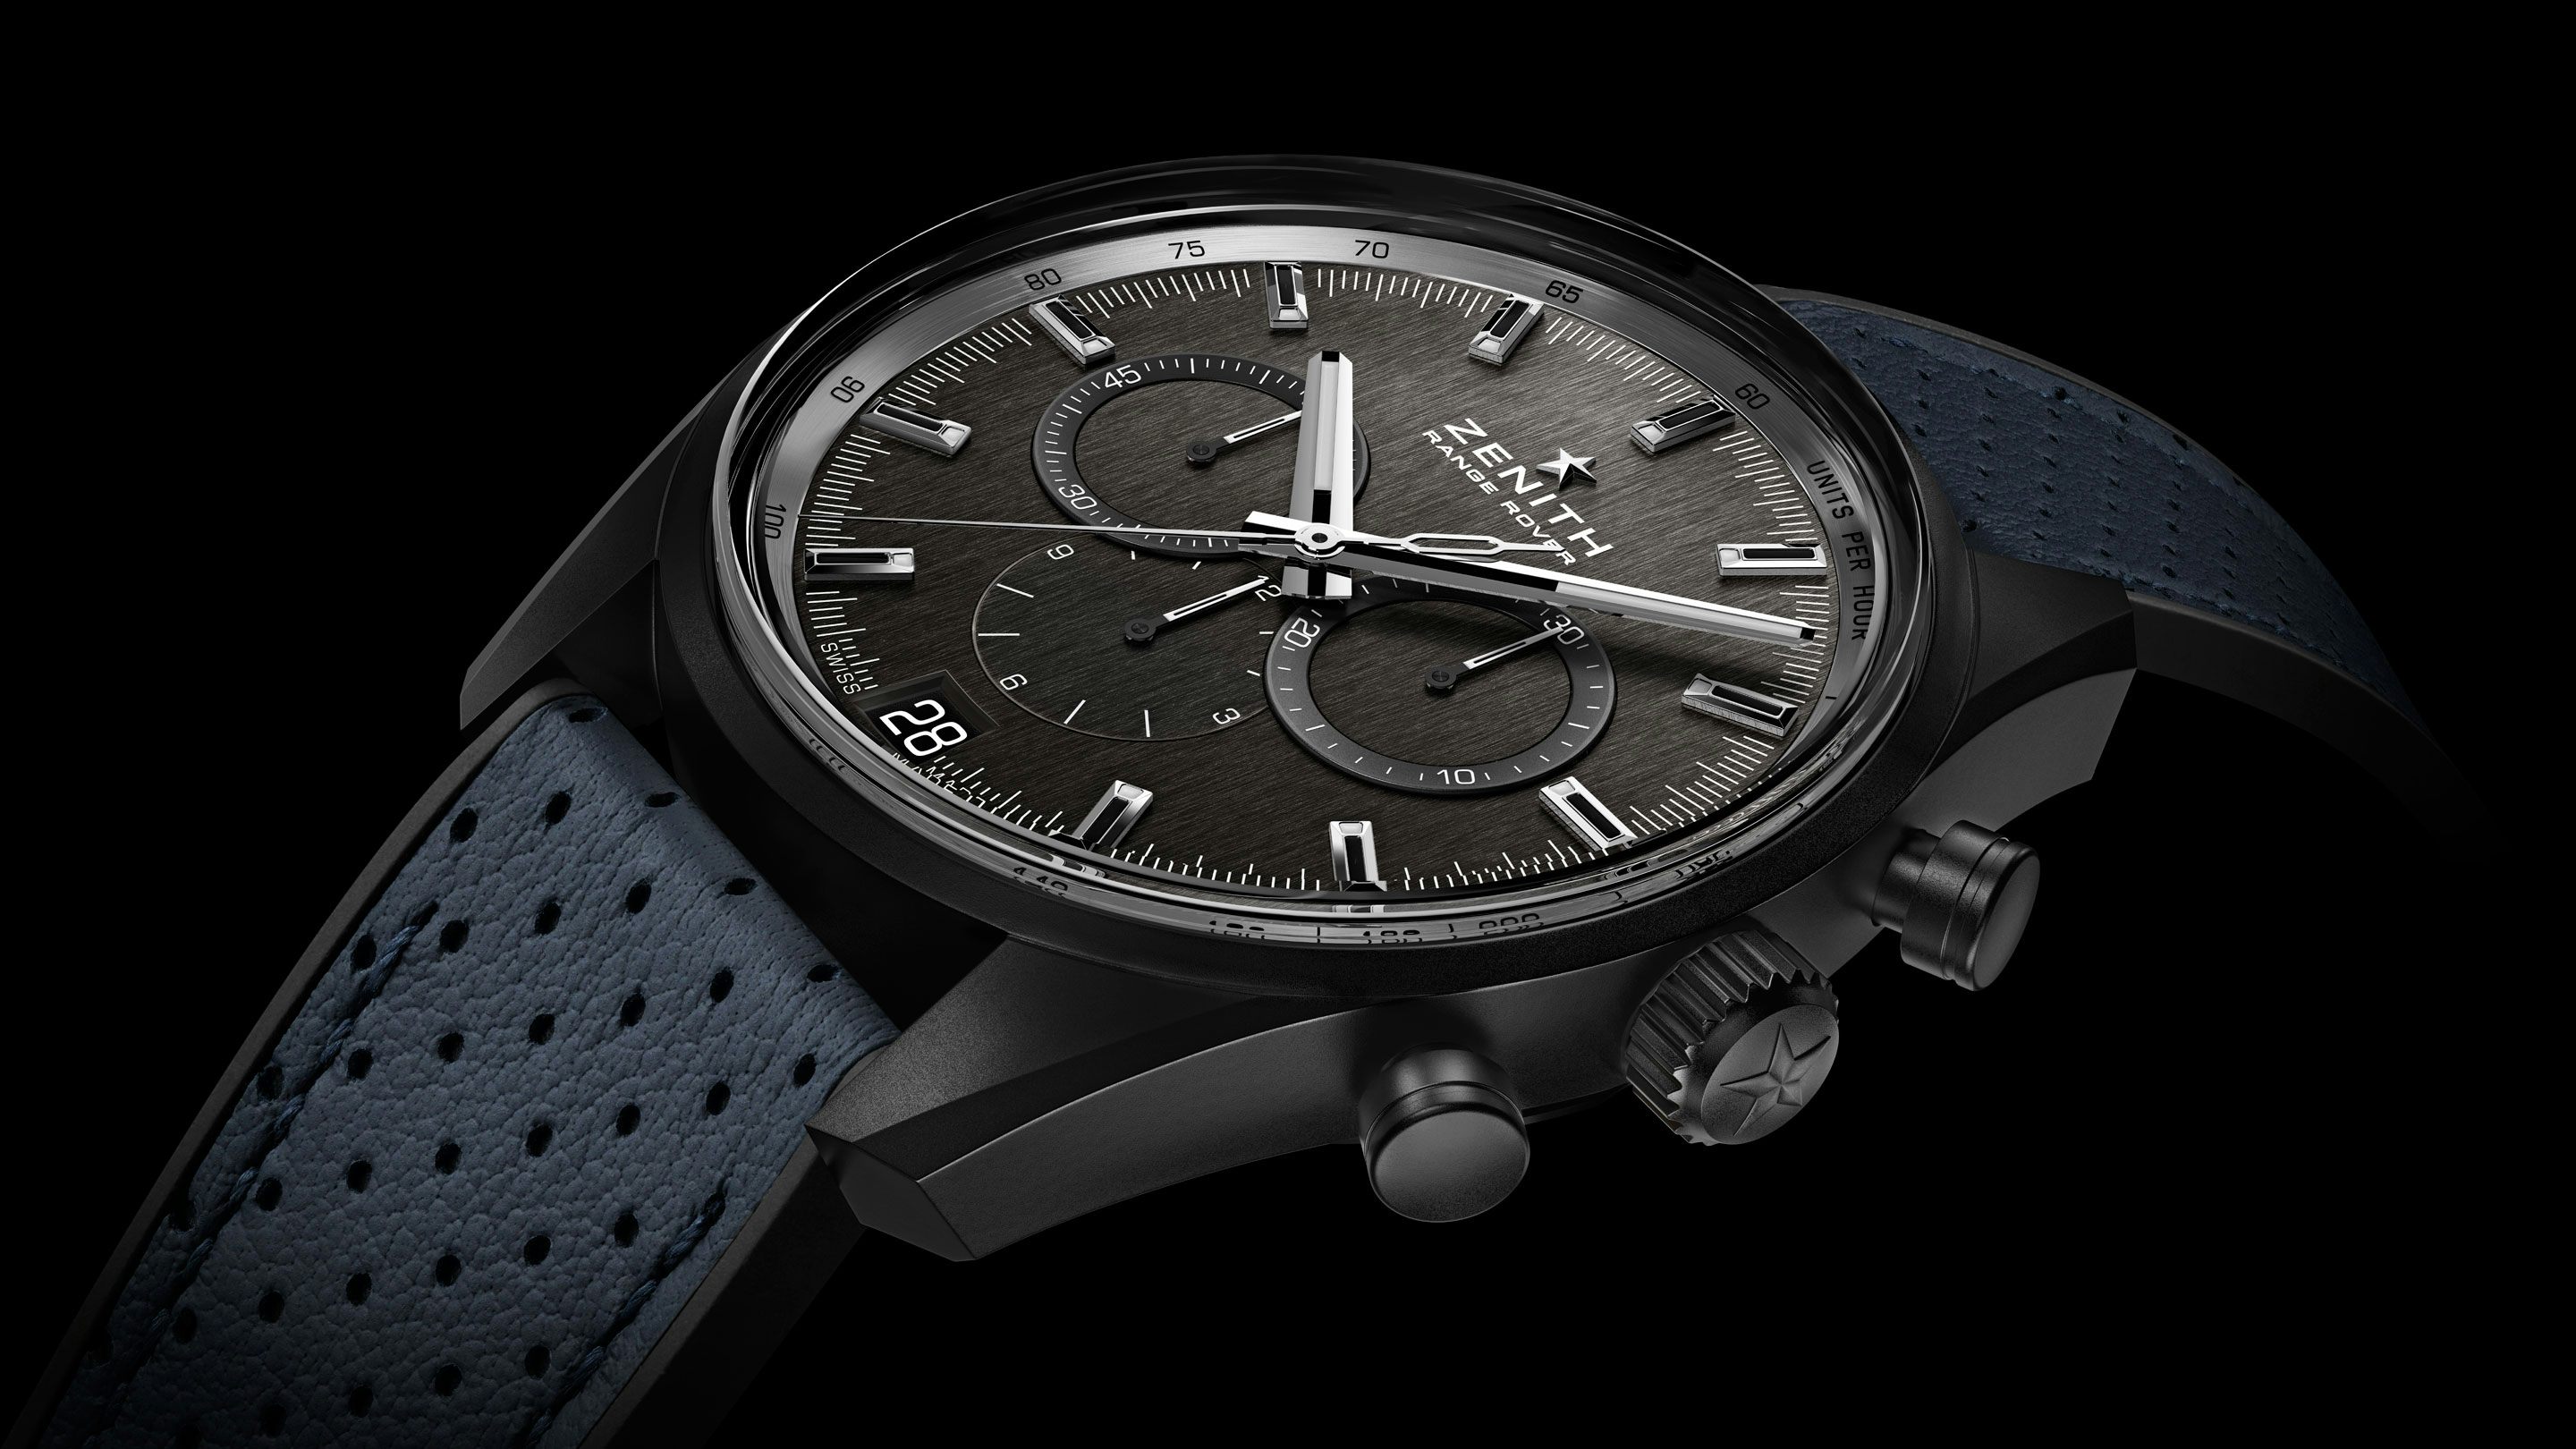 Introducing: A Zenith High-Frequency Chronograph That Goes For Bold -  Hodinkee